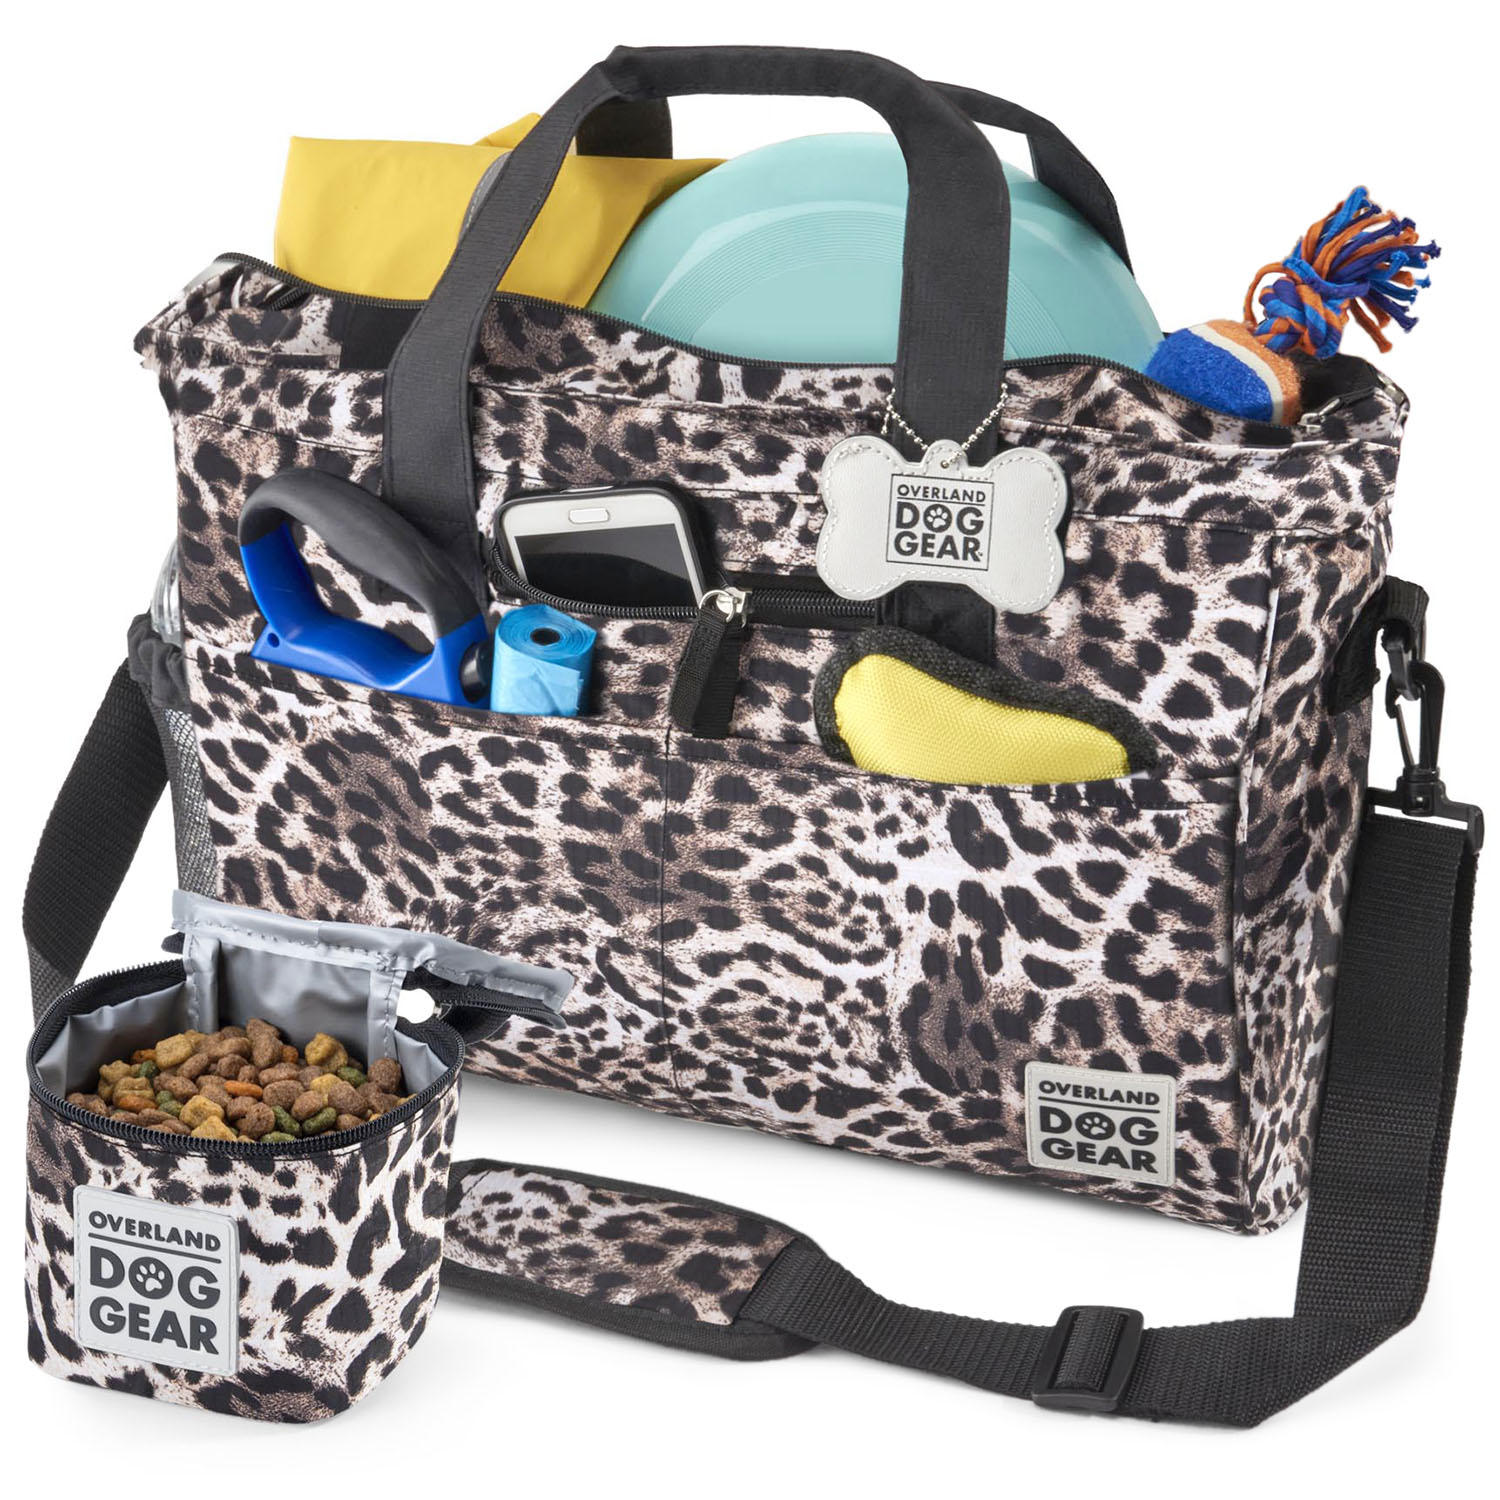 Mobile Dog Gear Day Away Tote with Lined Food Carrier, Cheetah